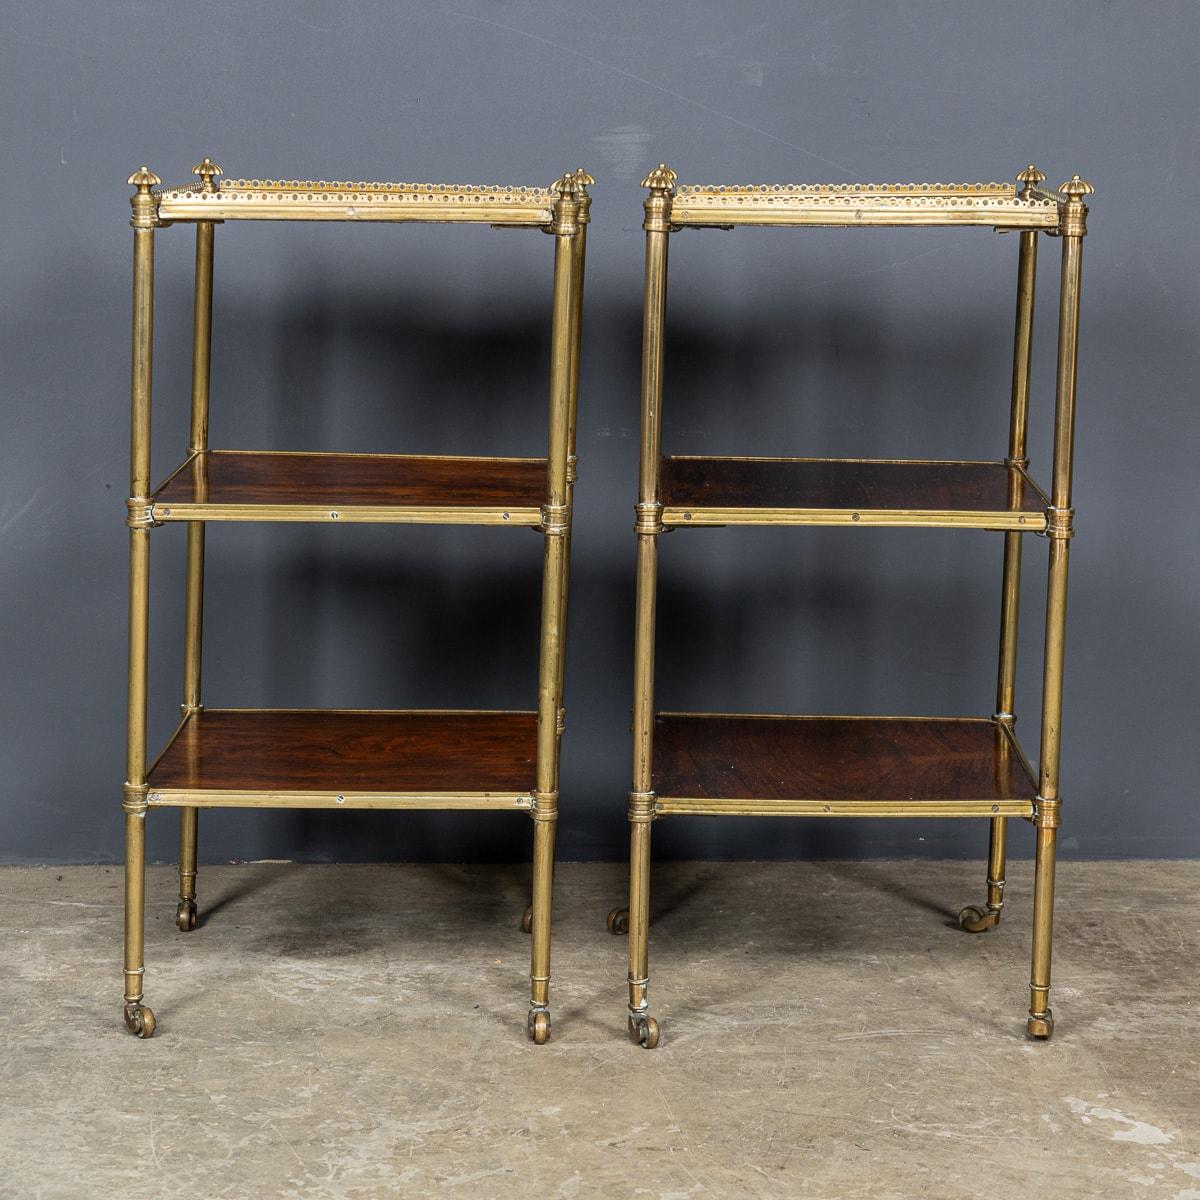 Early 19th Century Pair Of Antique 19th Century Rosewood & Brass Three Tier Etageres c.1820 For Sale